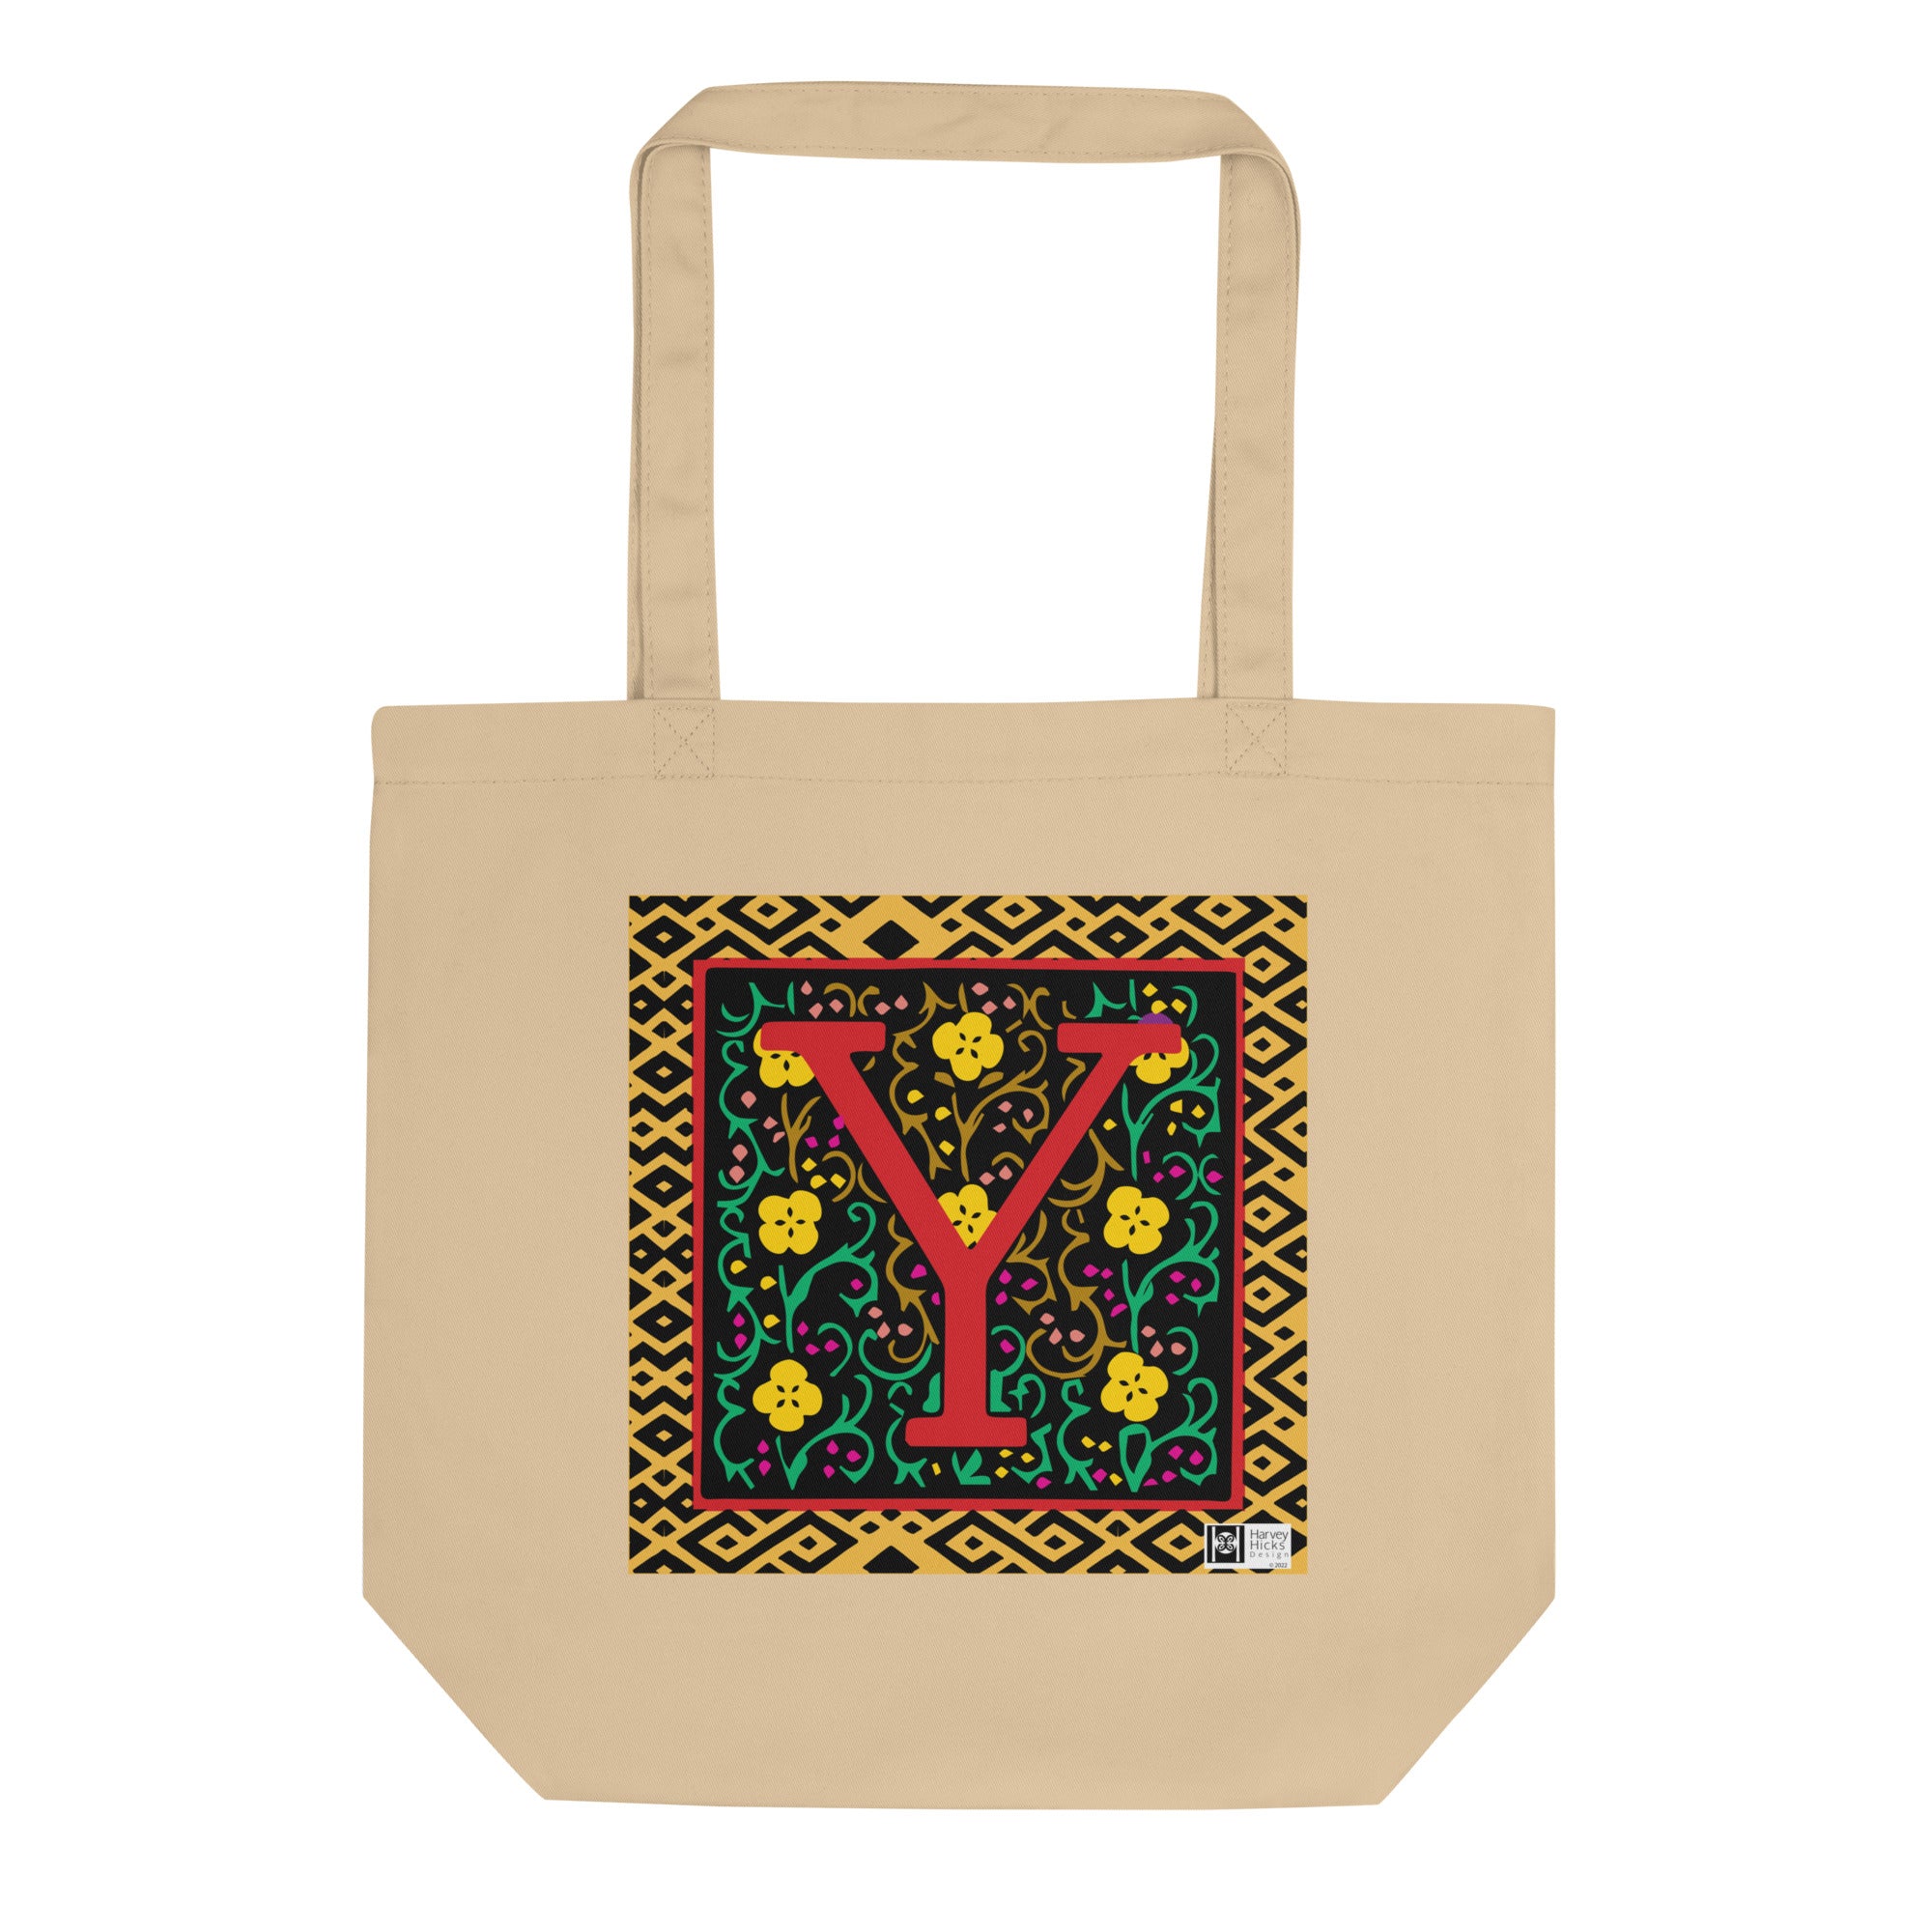 100% Organic Cotton Eco-Tote Featuring Decorative Lettering, “Y”